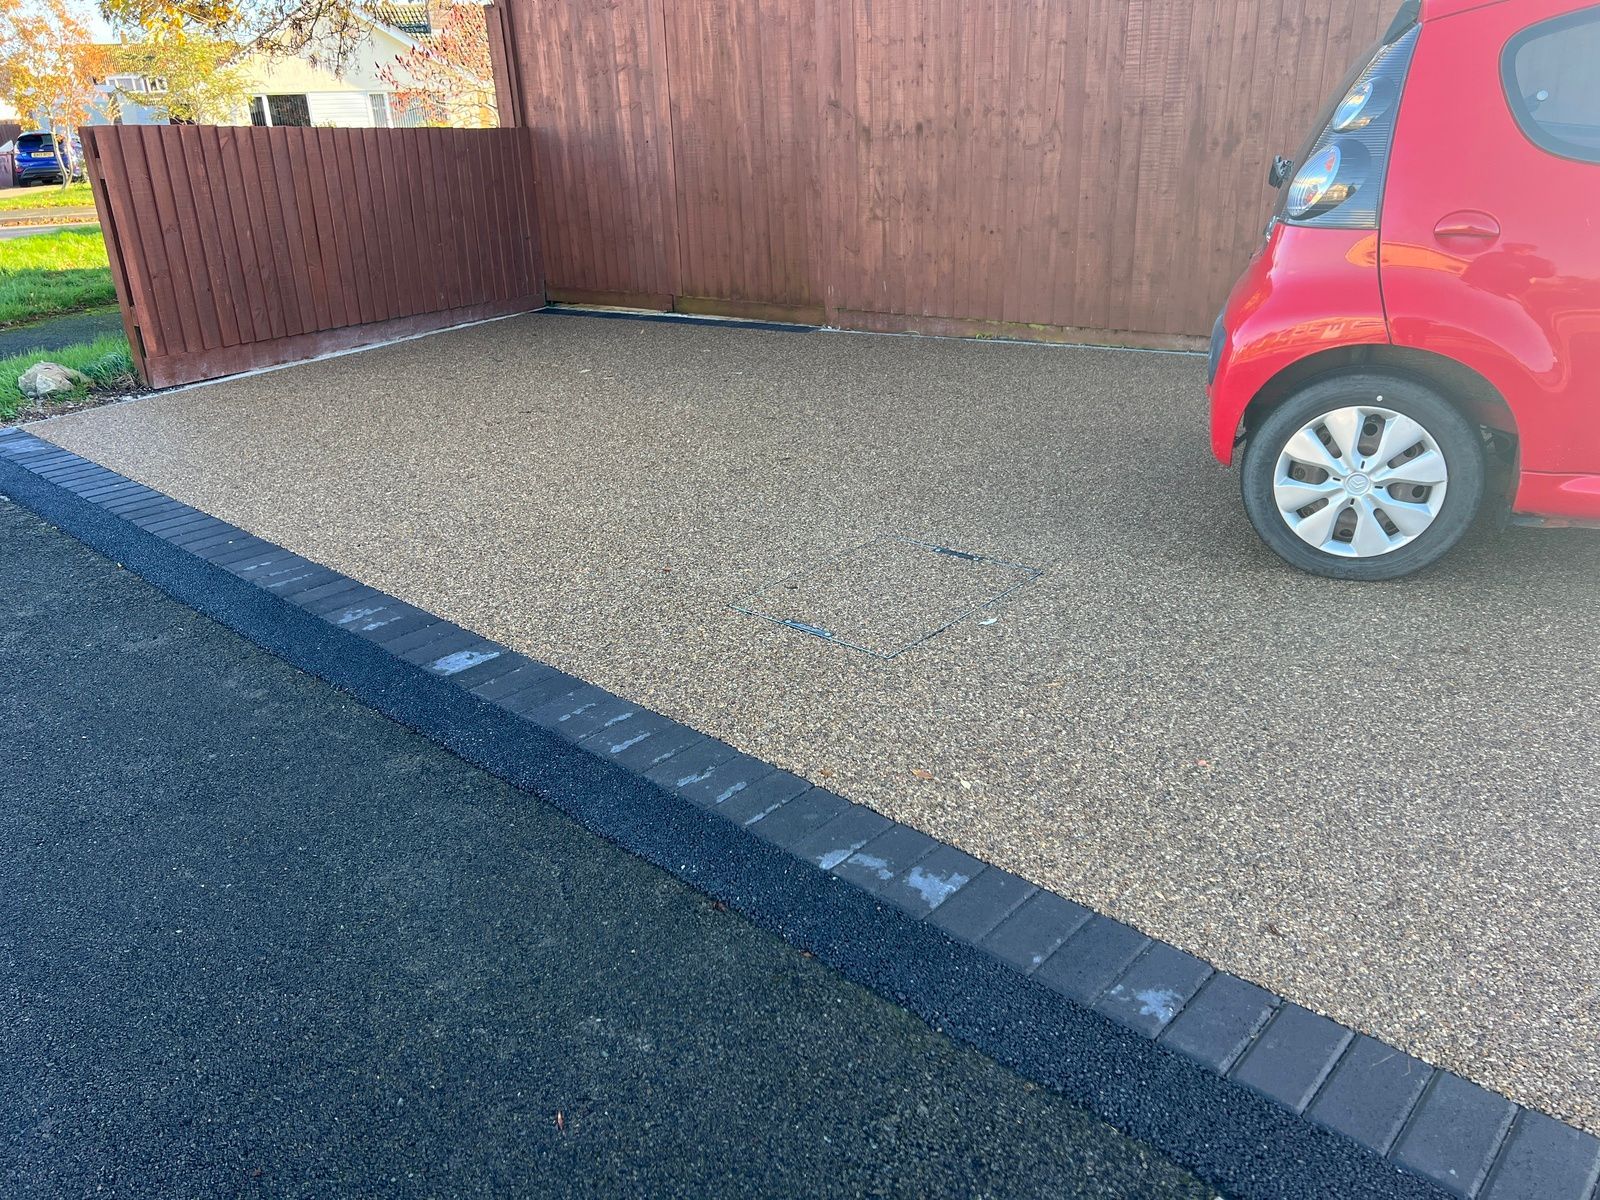 Completed resin driveway project in Bristol, with a red car parked on it.